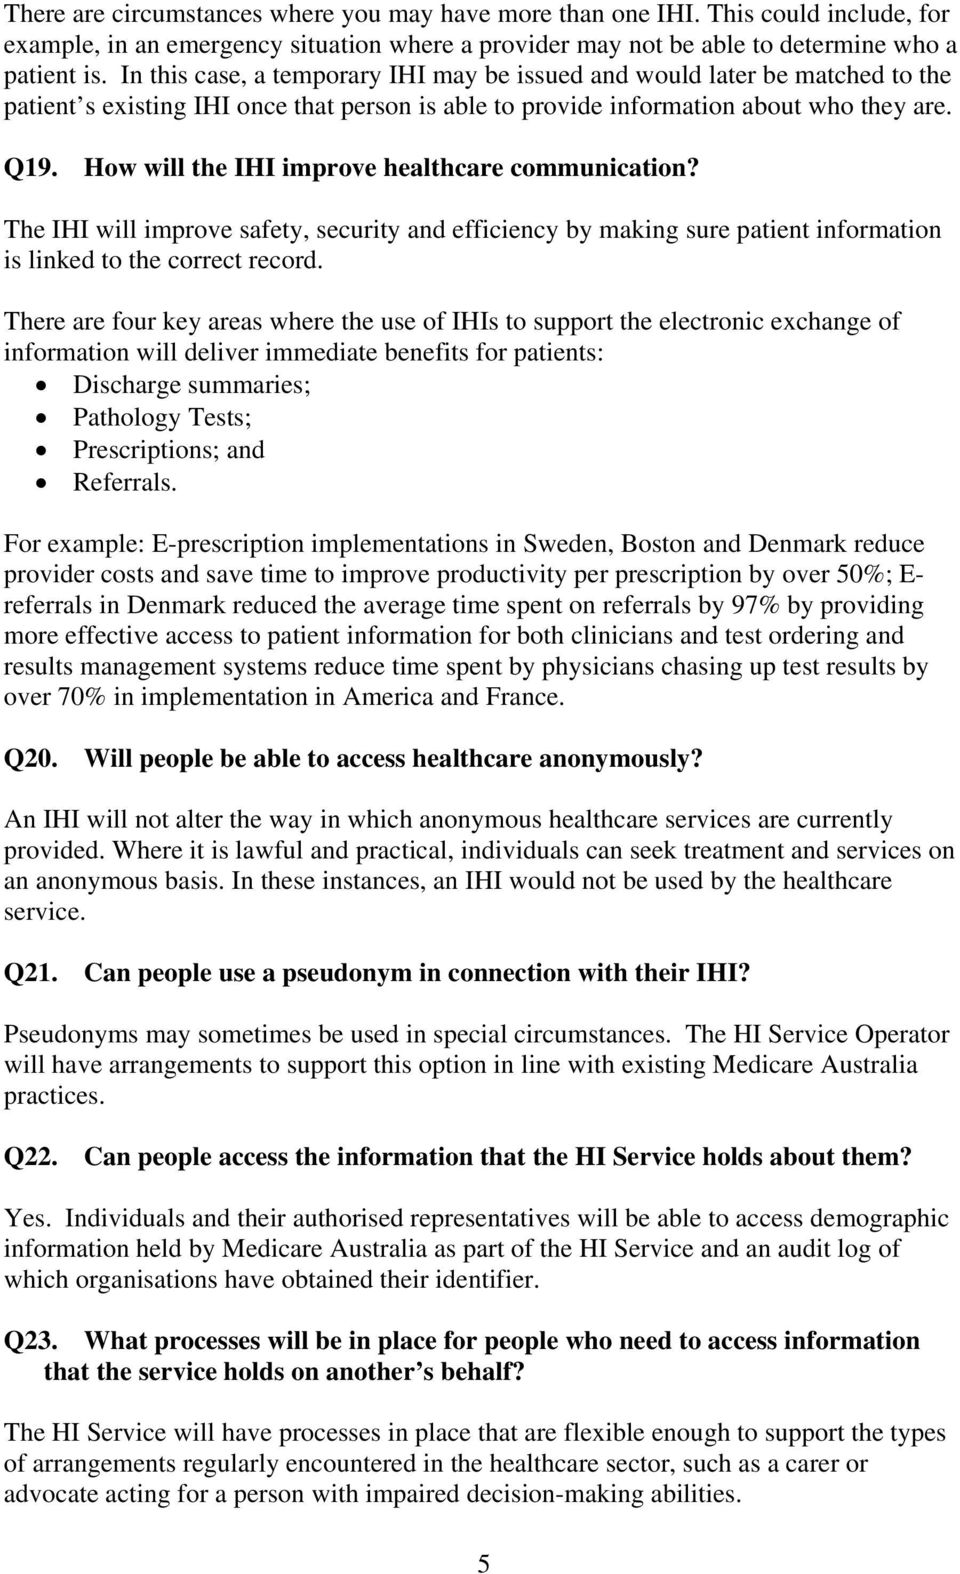 How will the IHI improve healthcare communication? The IHI will improve safety, security and efficiency by making sure patient information is linked to the correct record.